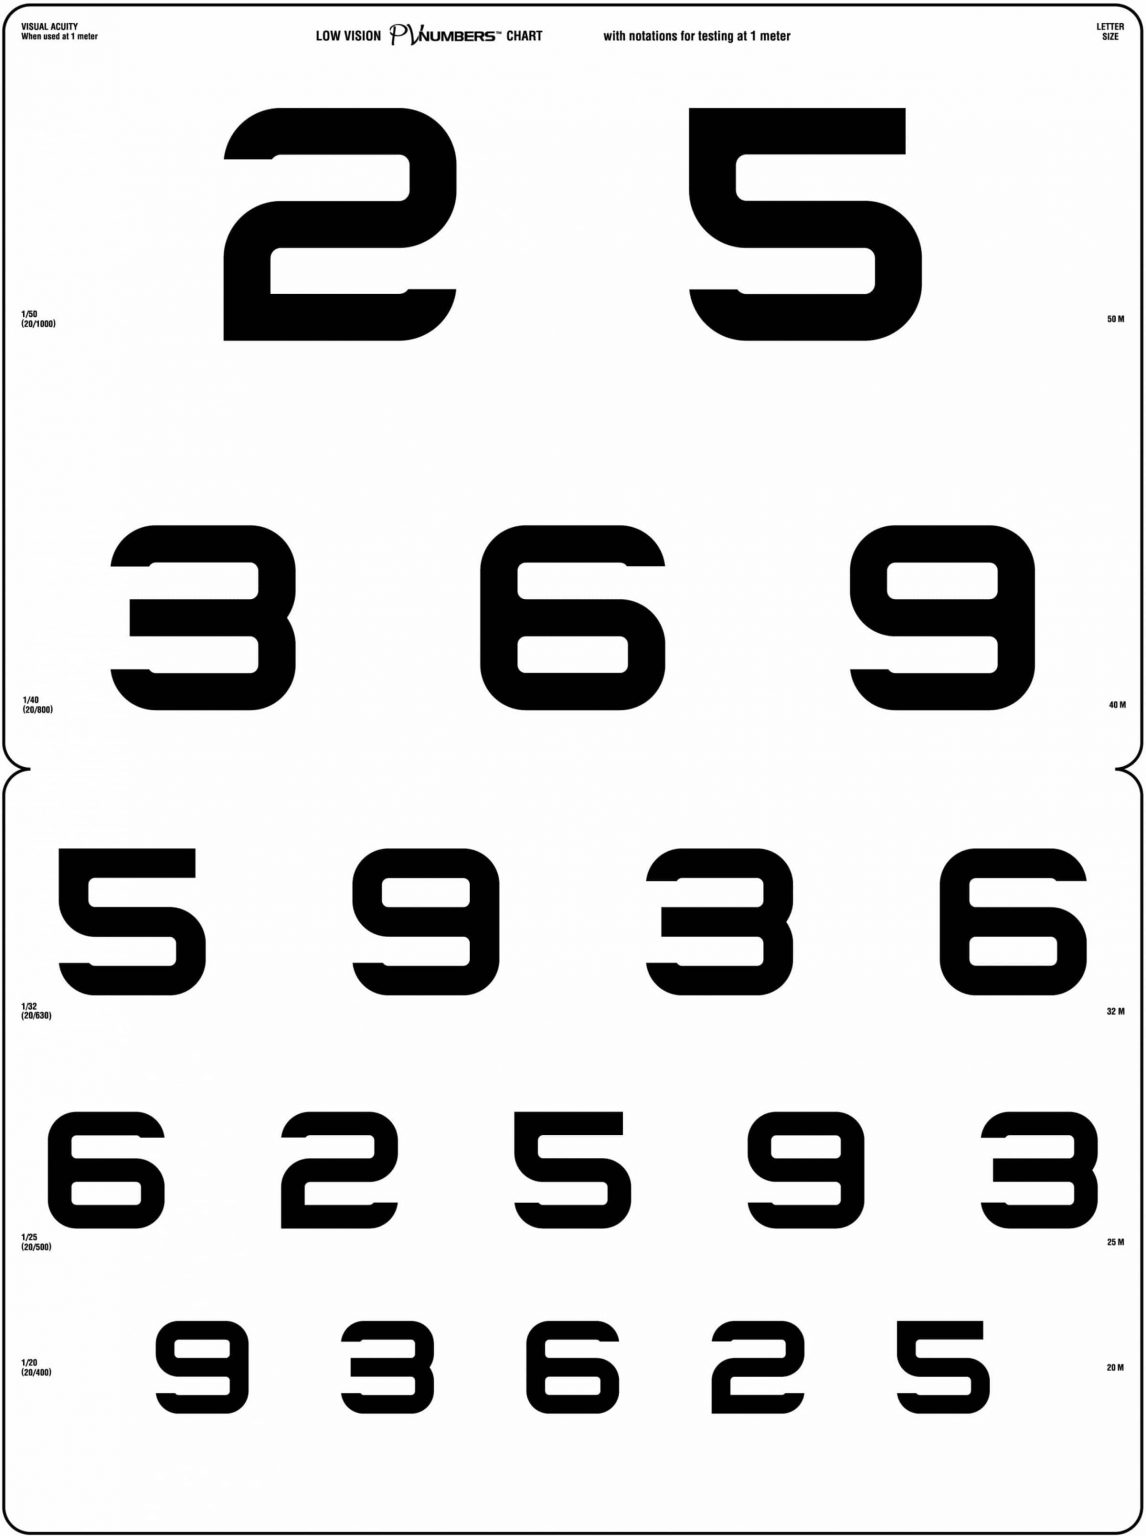 pv-numbers-low-vision-chart-precision-vision